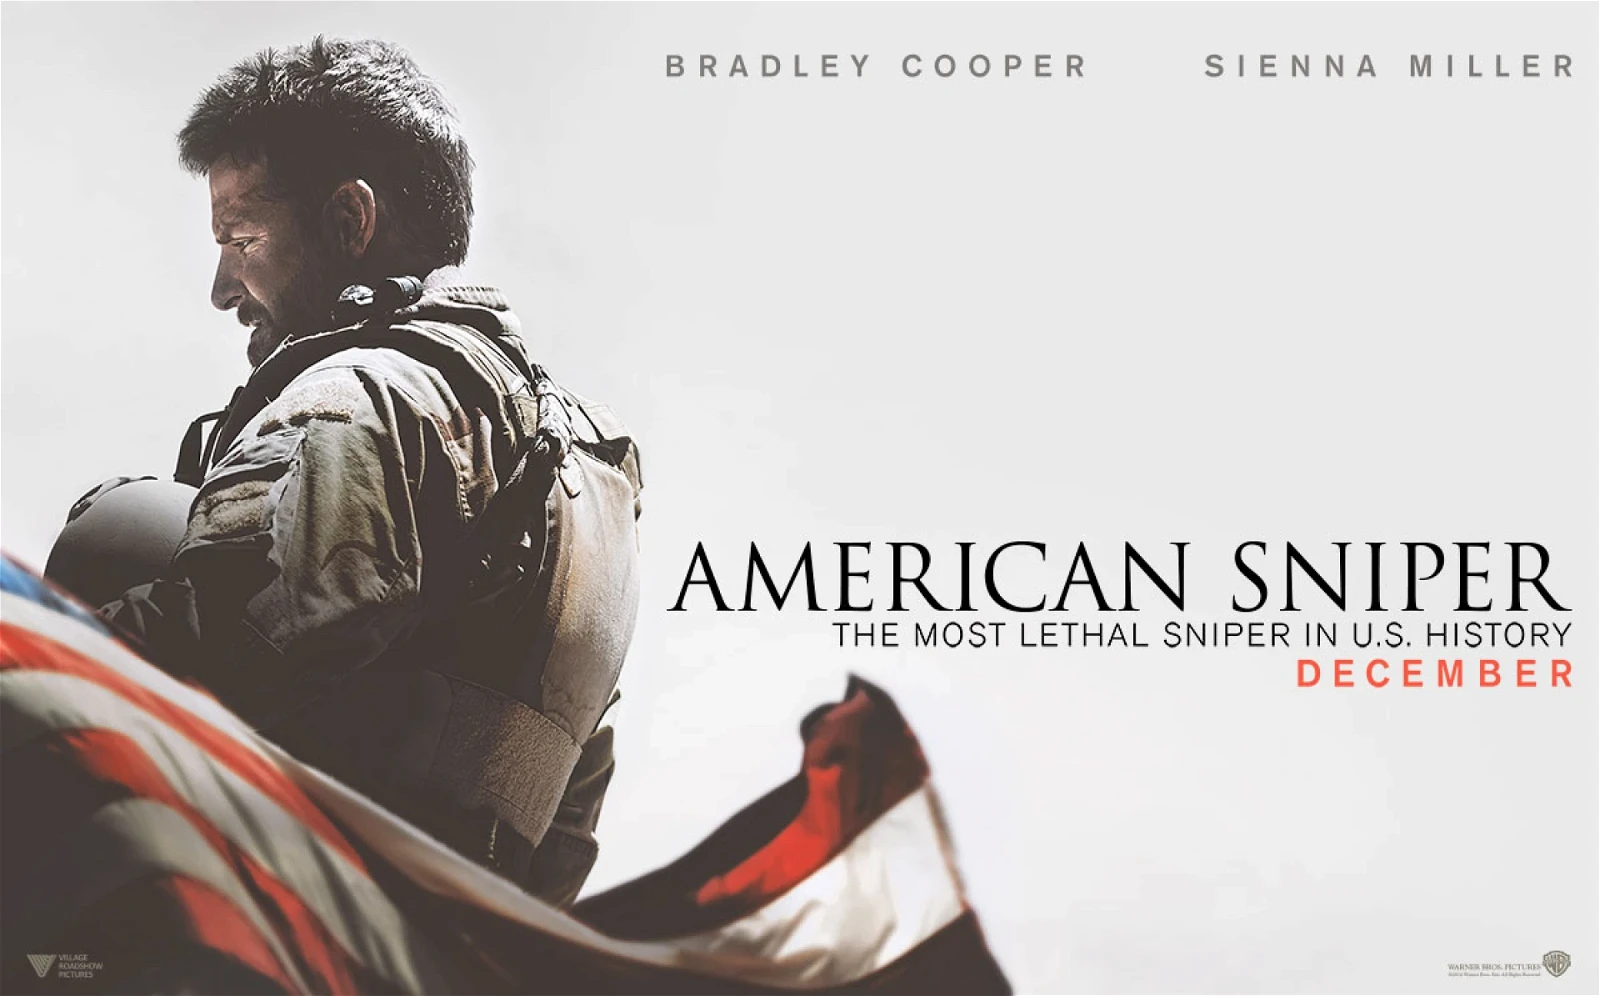 Eastwood considers American Sniper as his most significant war based film